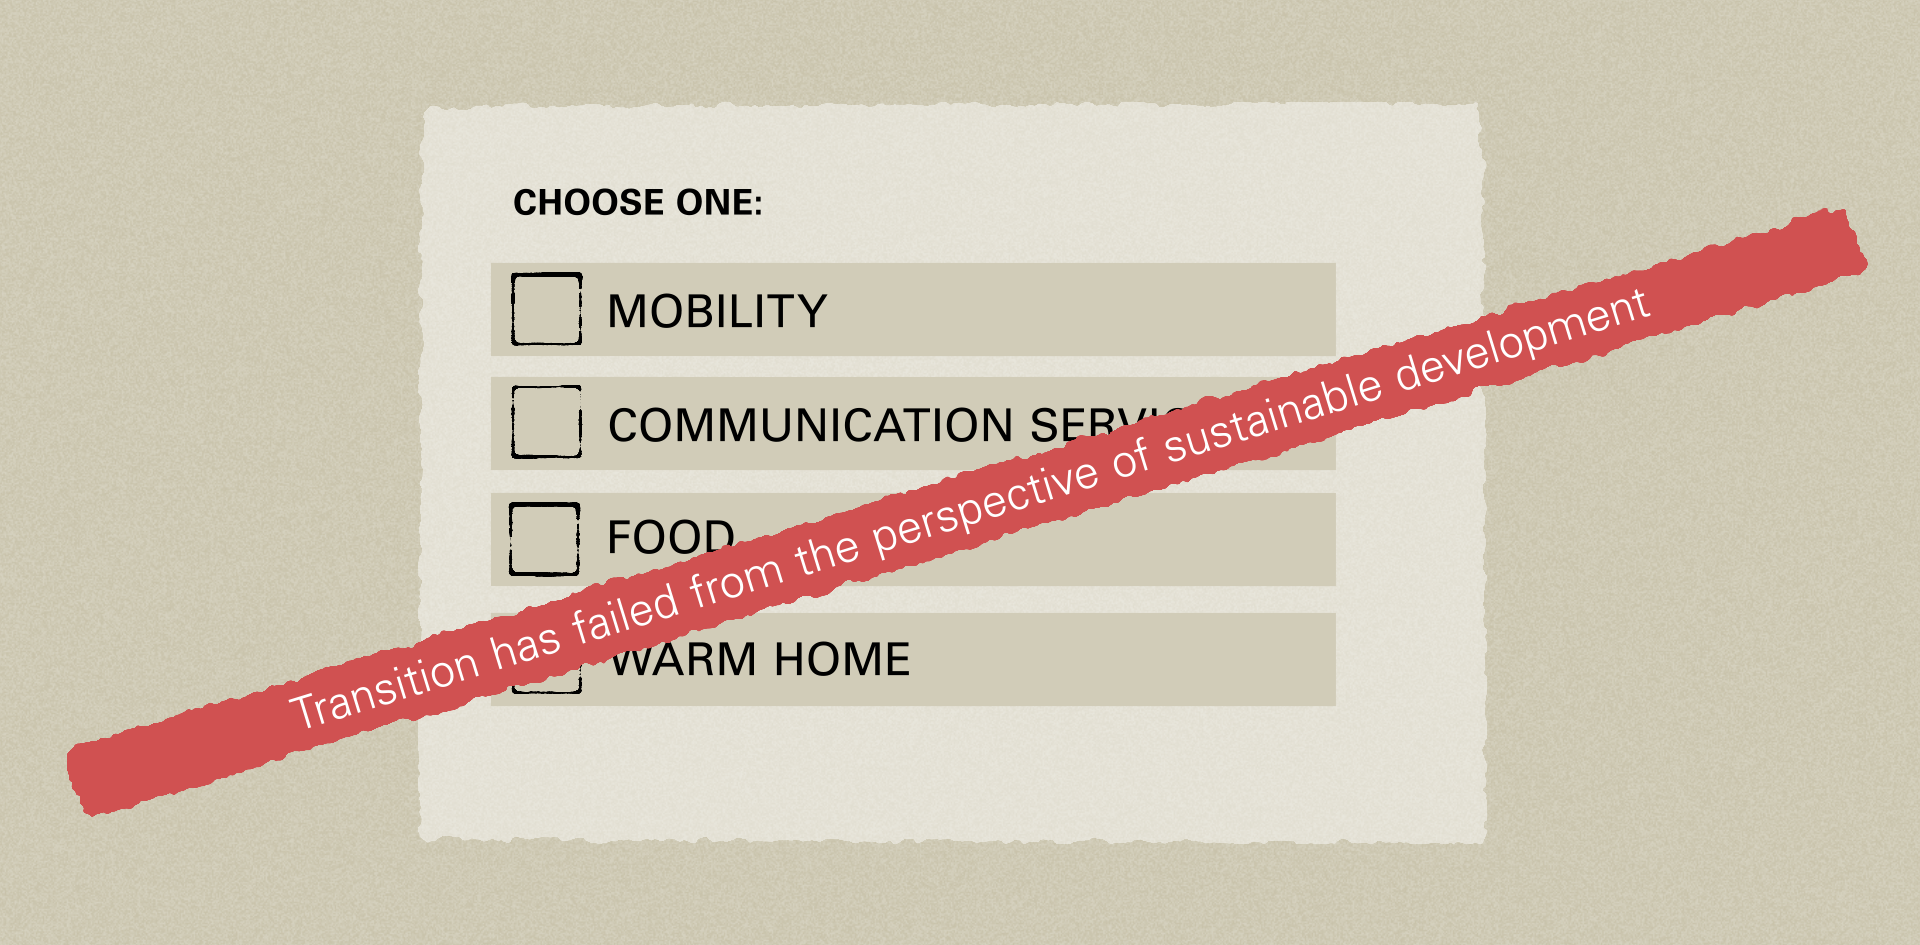 Image showing the choices of mobility, communication services, food and warm home, with a red line crossing out the choices that reads “Transition has failed from the perspective of sustainable development”.